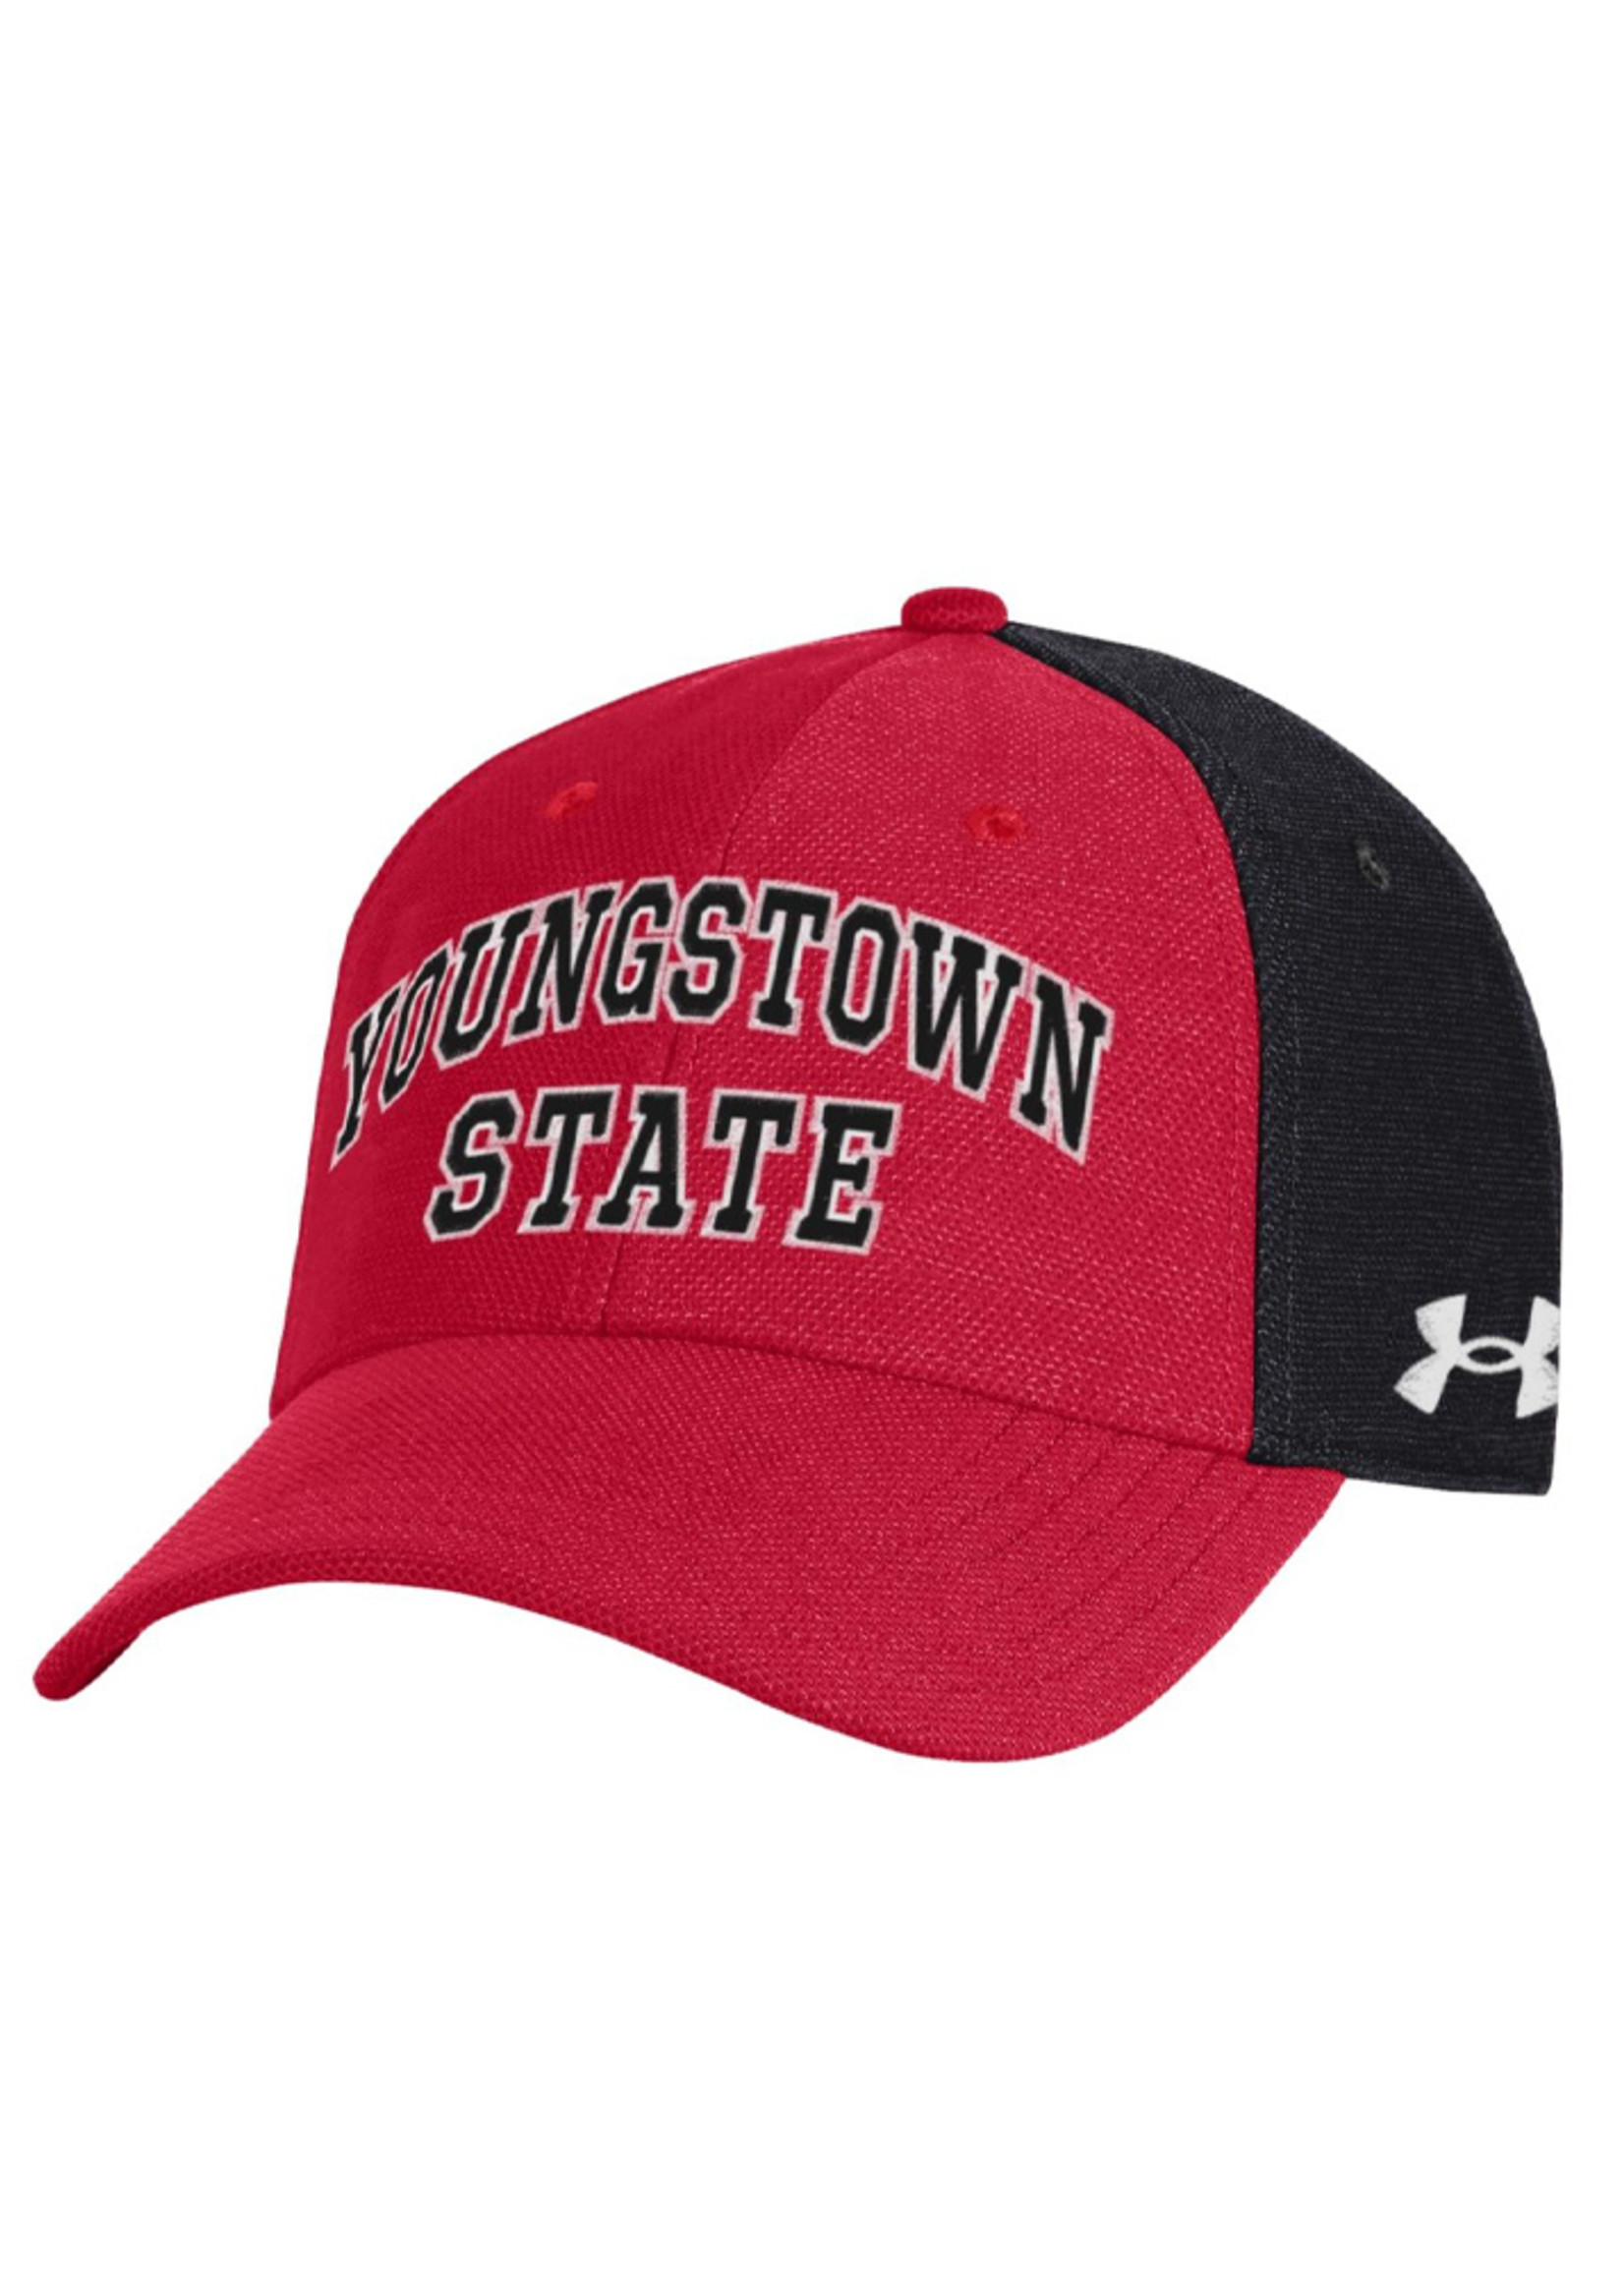 Youngstown State Penguins Under Armour Hat